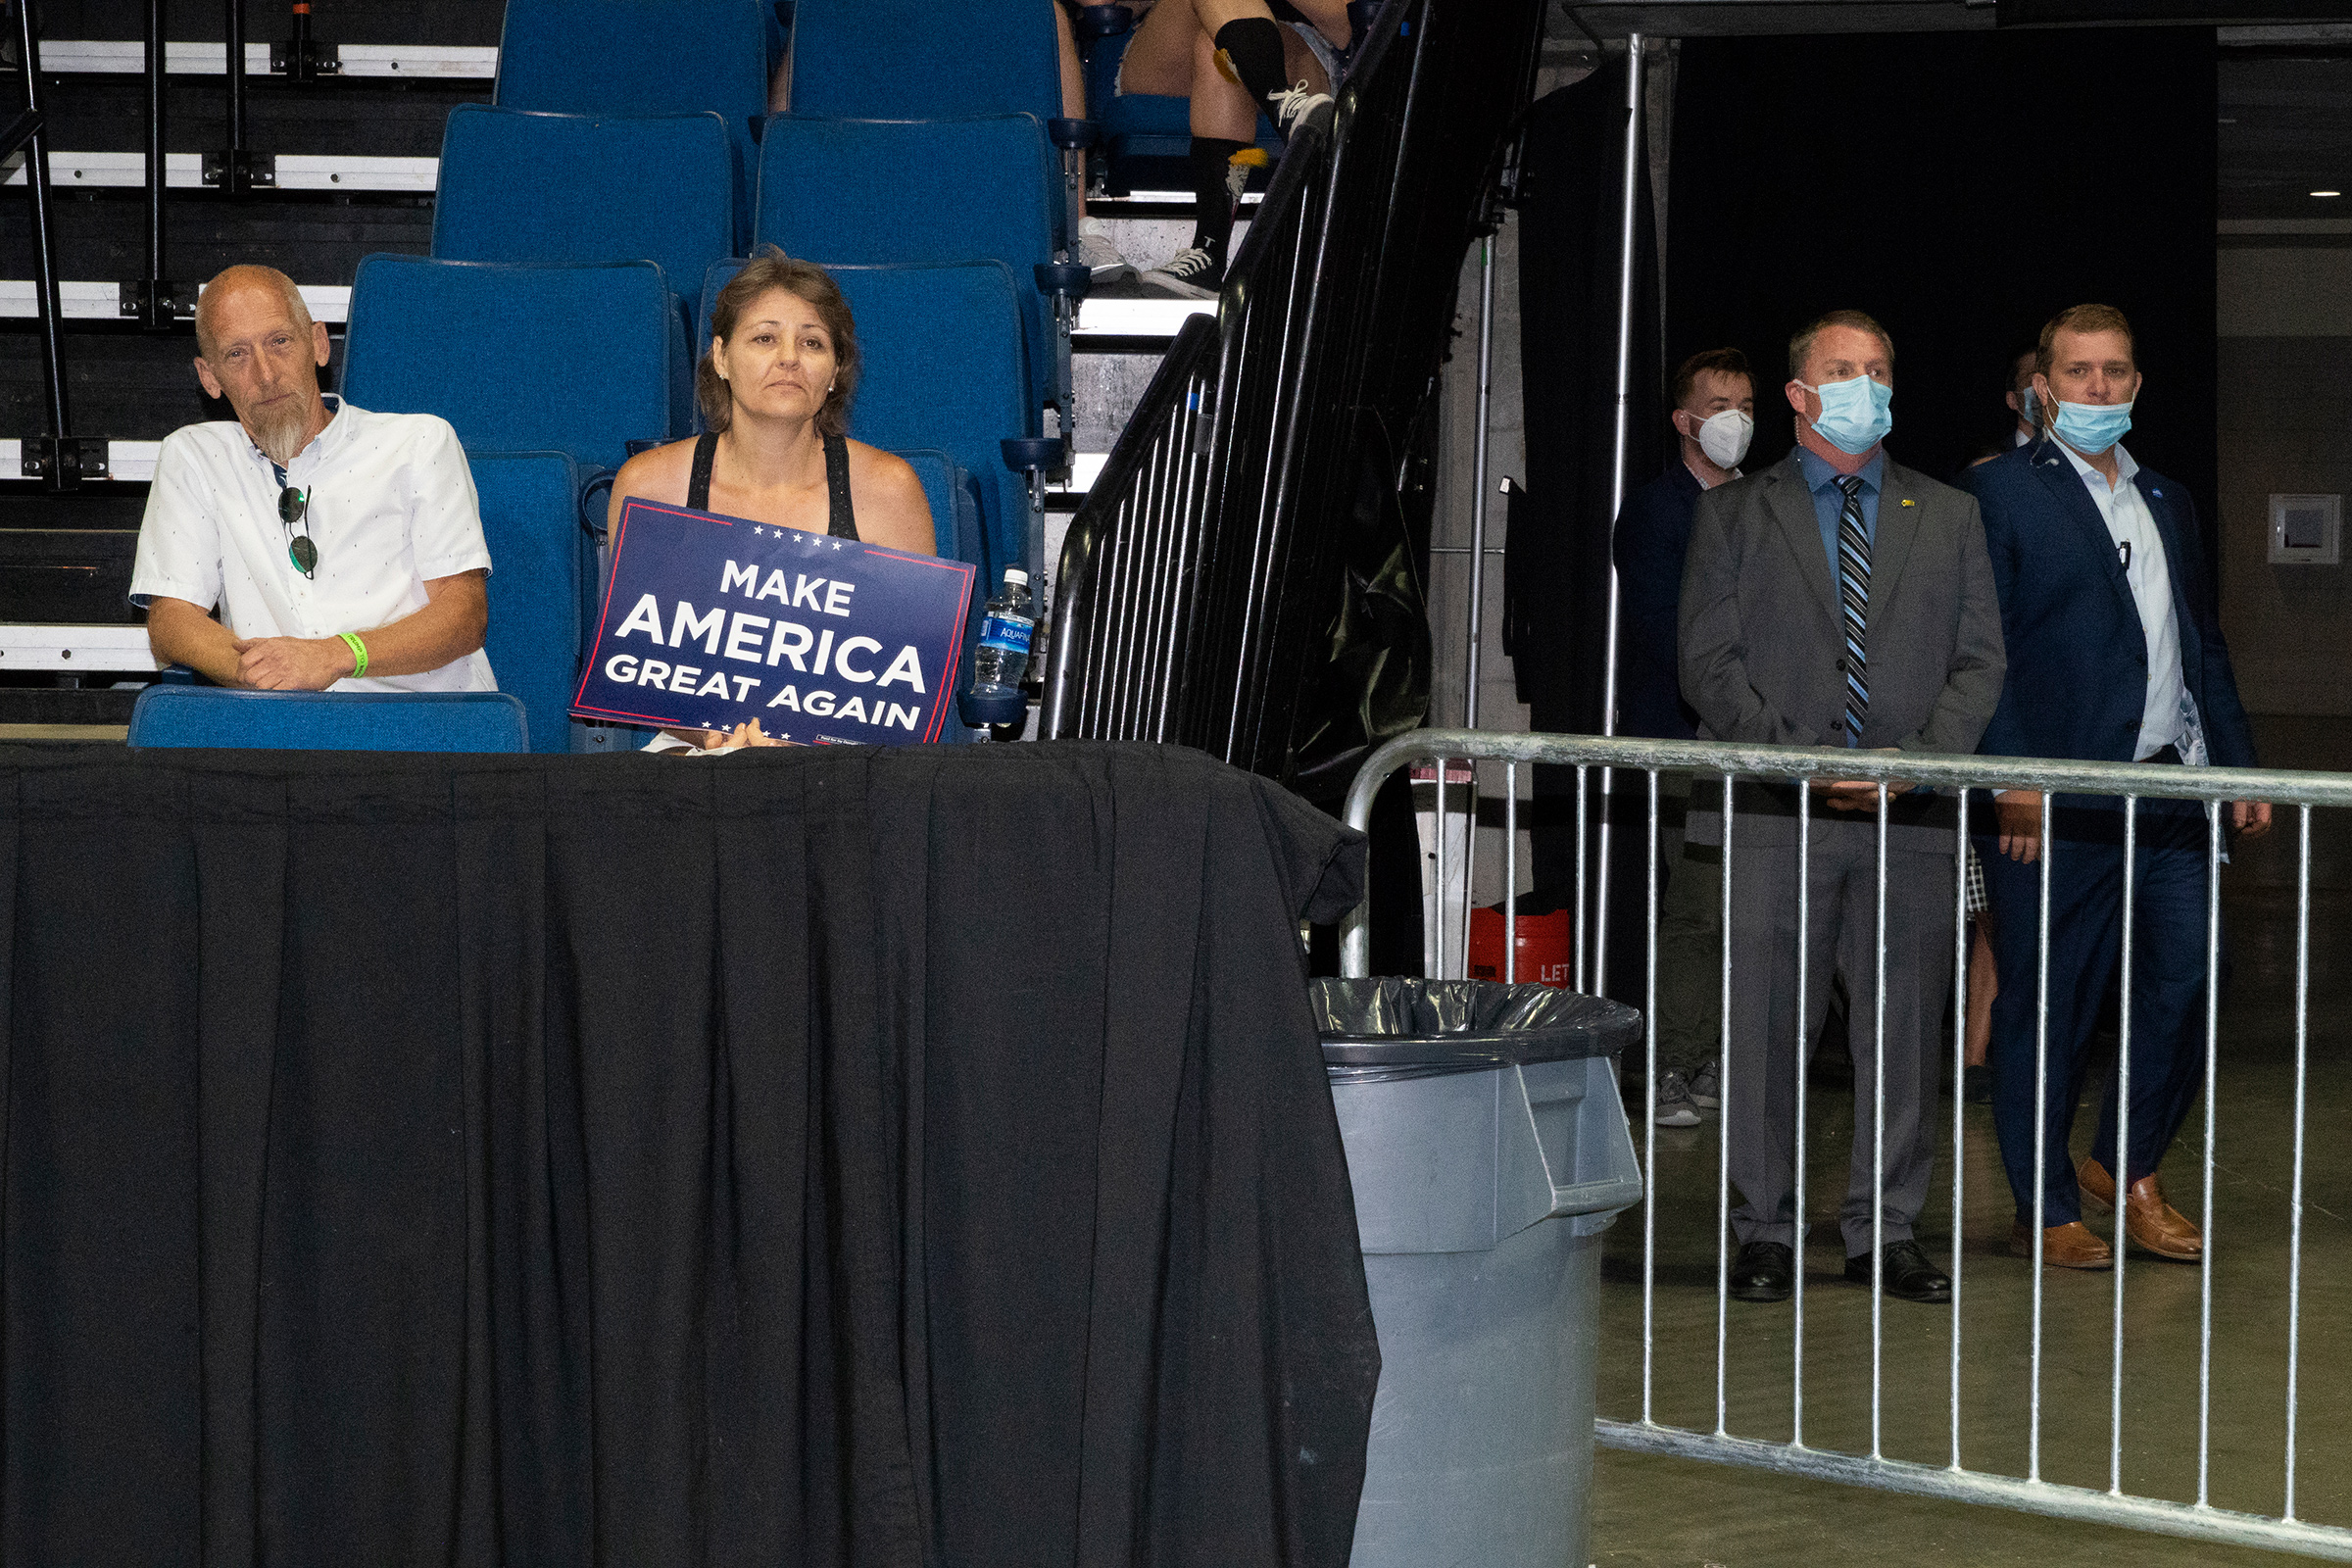 Trump supporters at his rally in Tulsa, Okla., on June 20